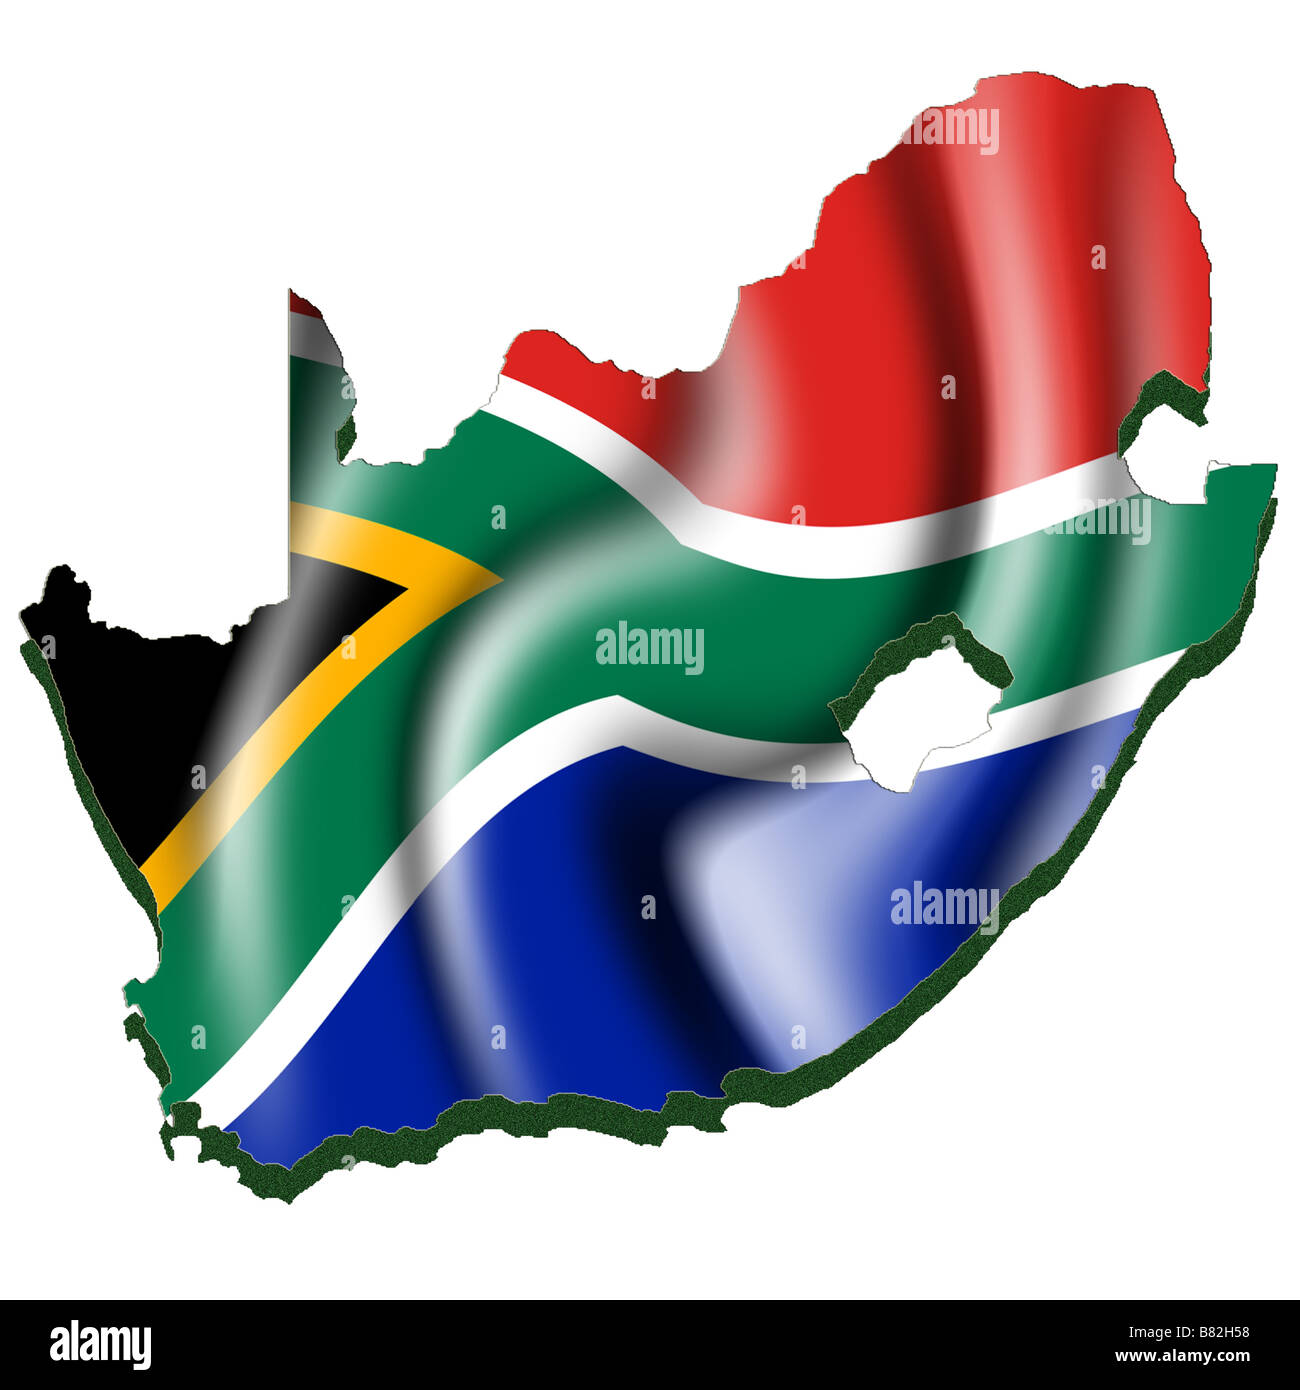 Outline map and flag of South Africa Stock Photo